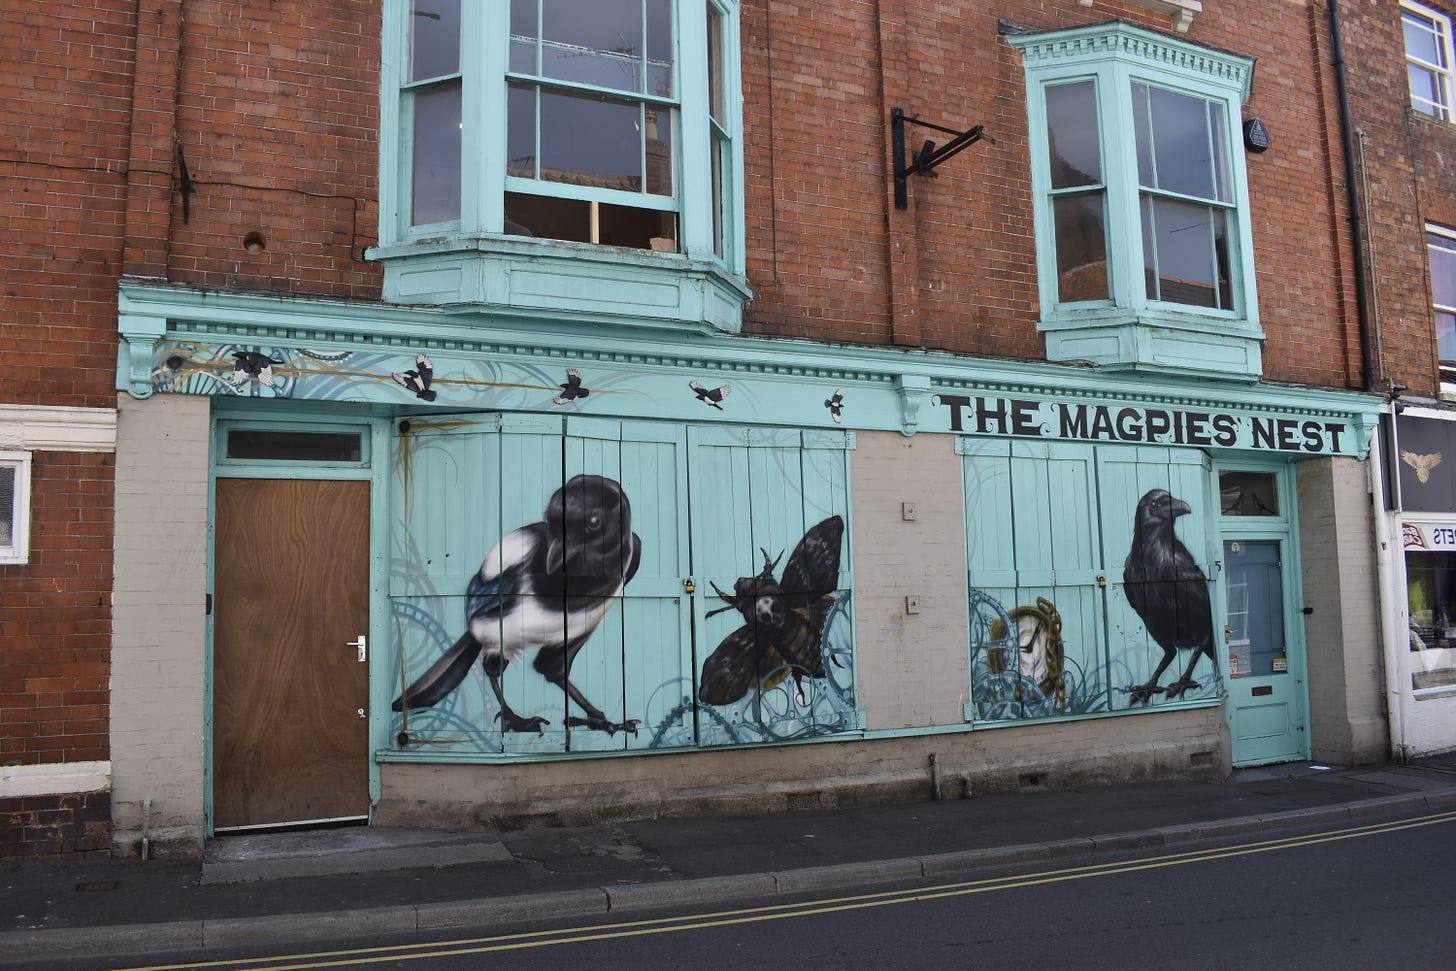 Shuttered shop front with a mural of a blackbird, moth, croww and clock called The Magpies Nest